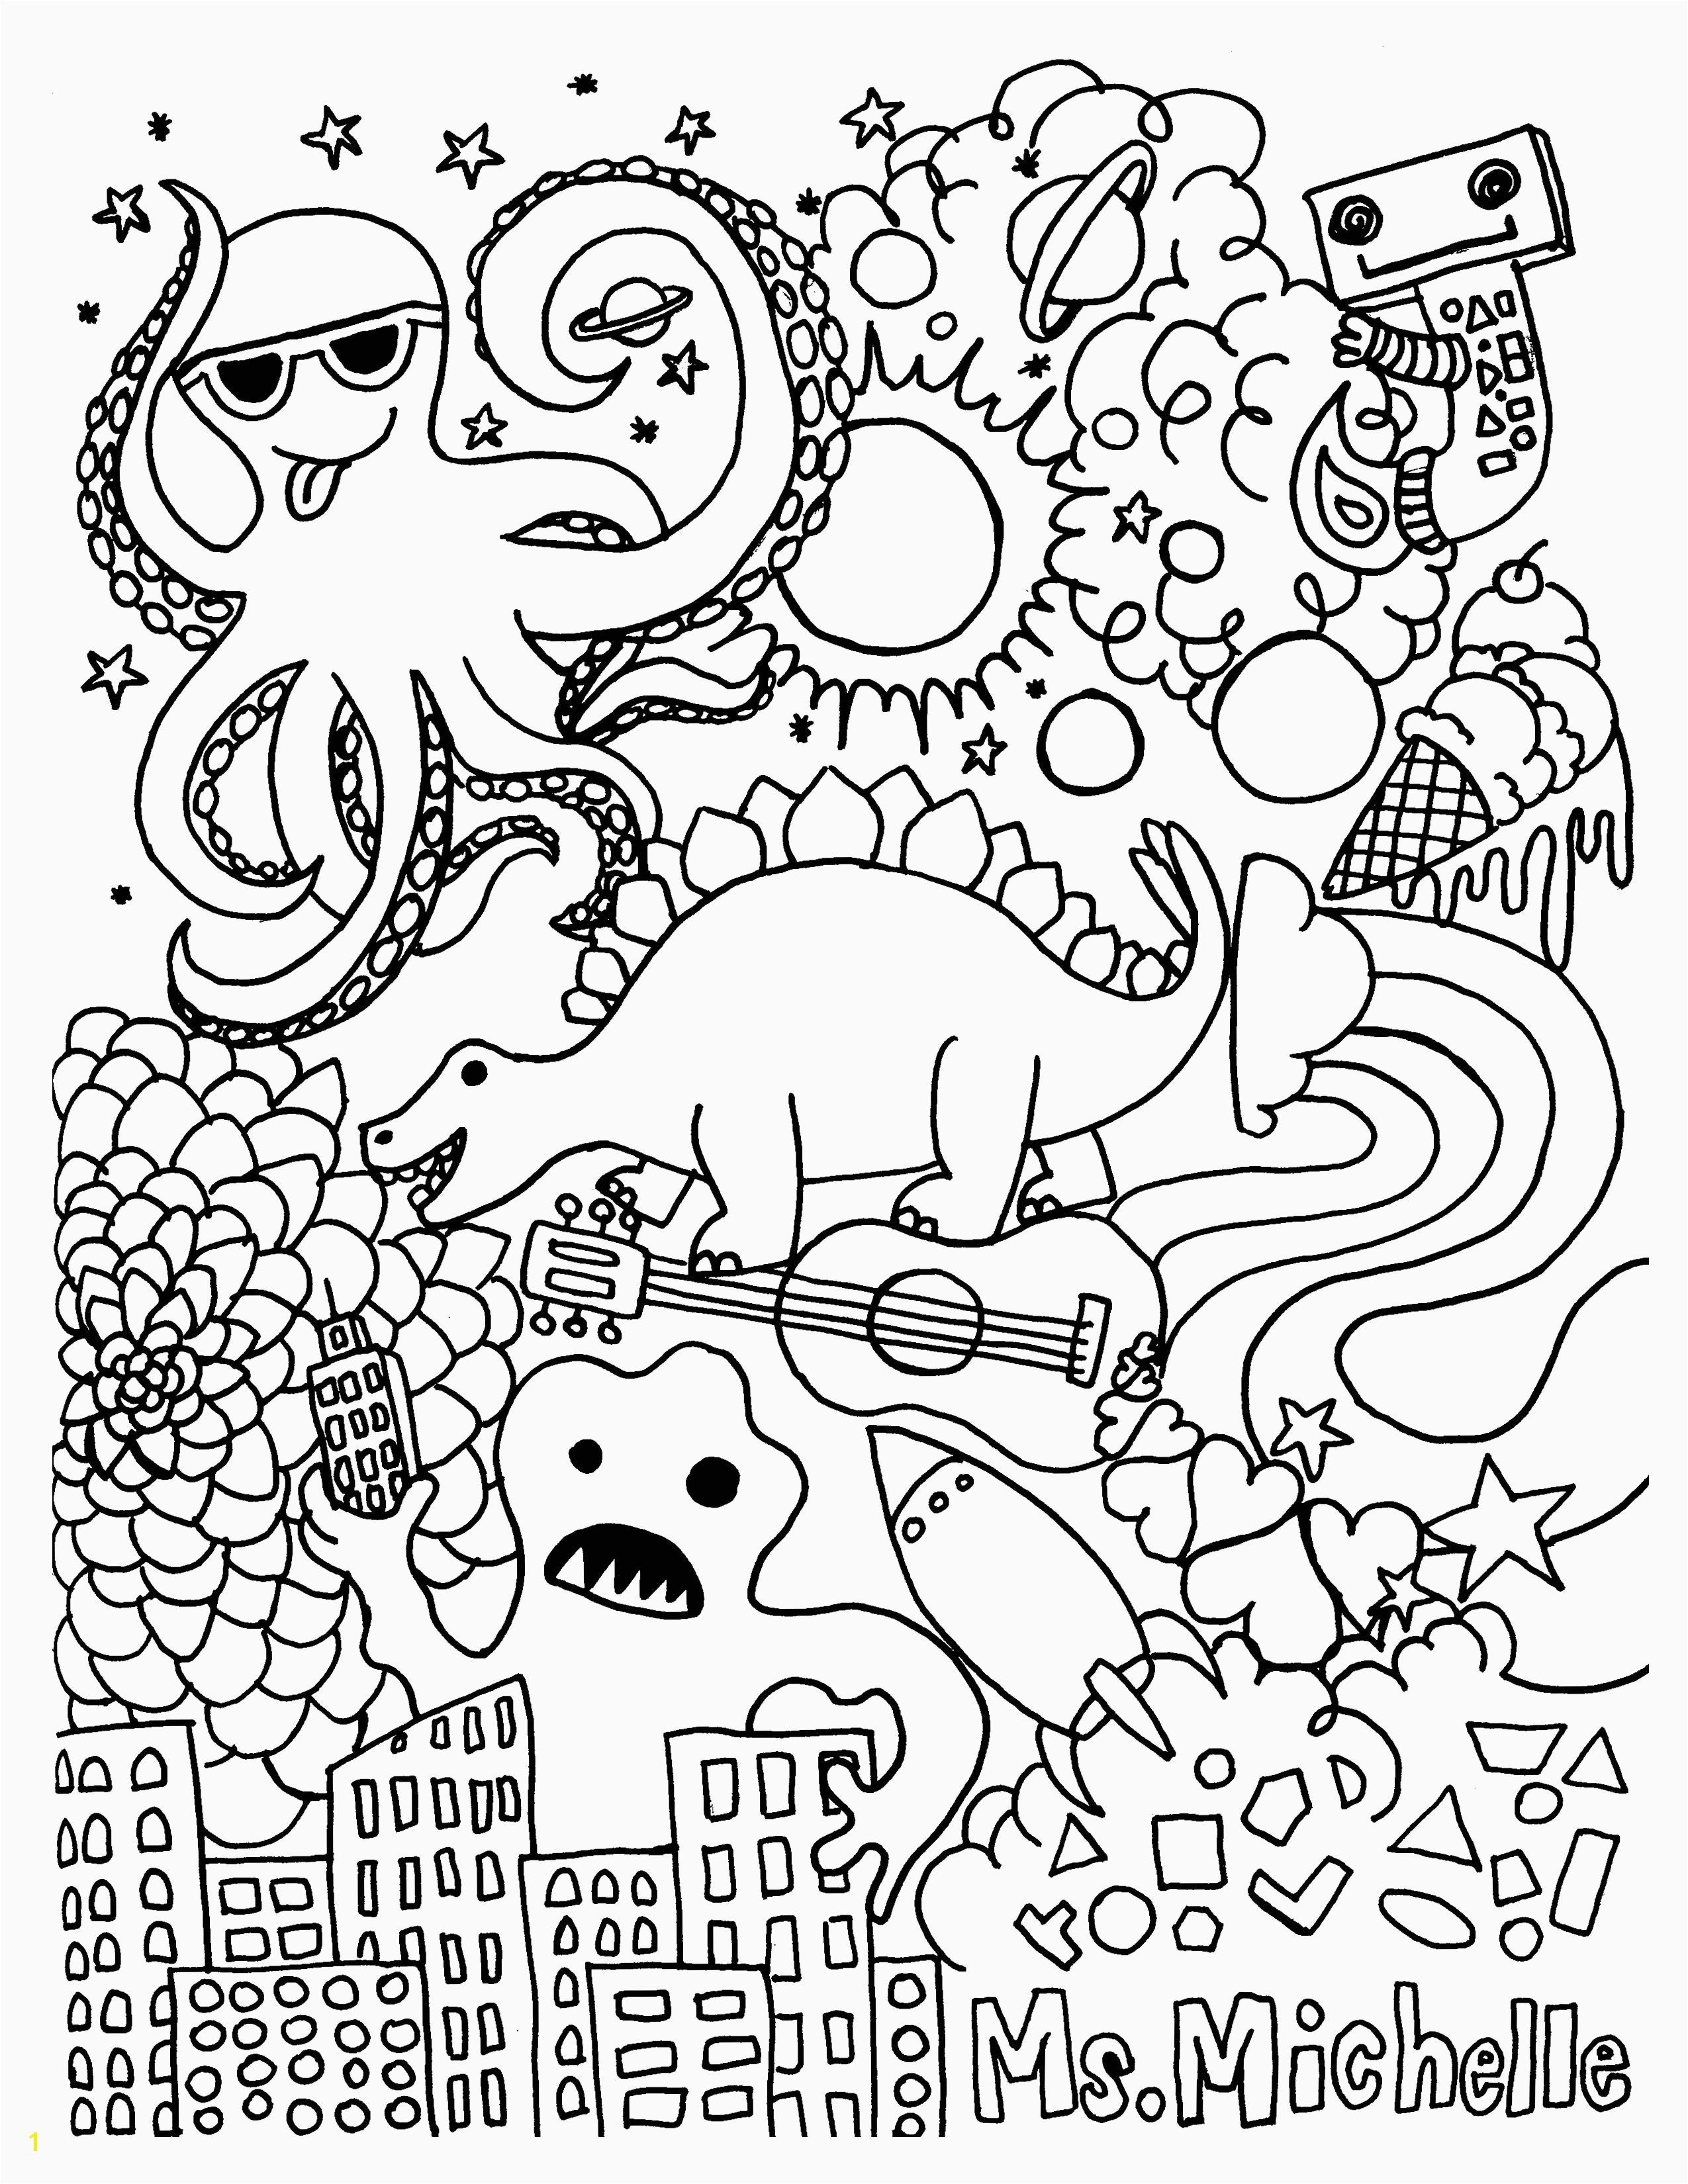 Halloween Witch Coloring Pages Halloween Witch Coloring Page Free Coloring Pages for Halloween